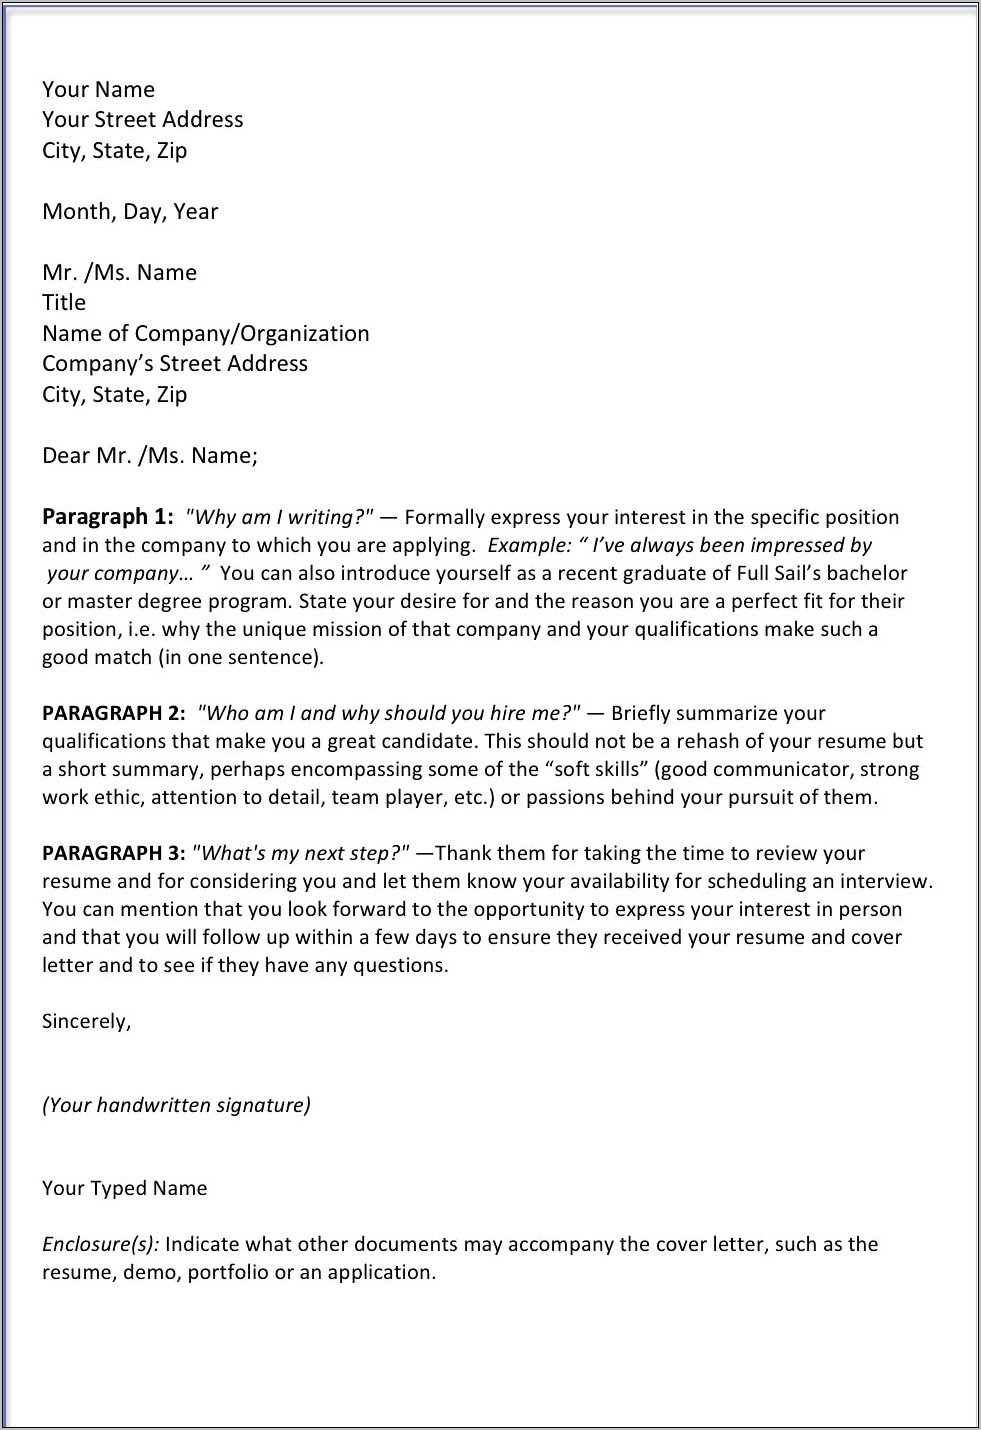 Should A Cover Letter Accompany A Resume